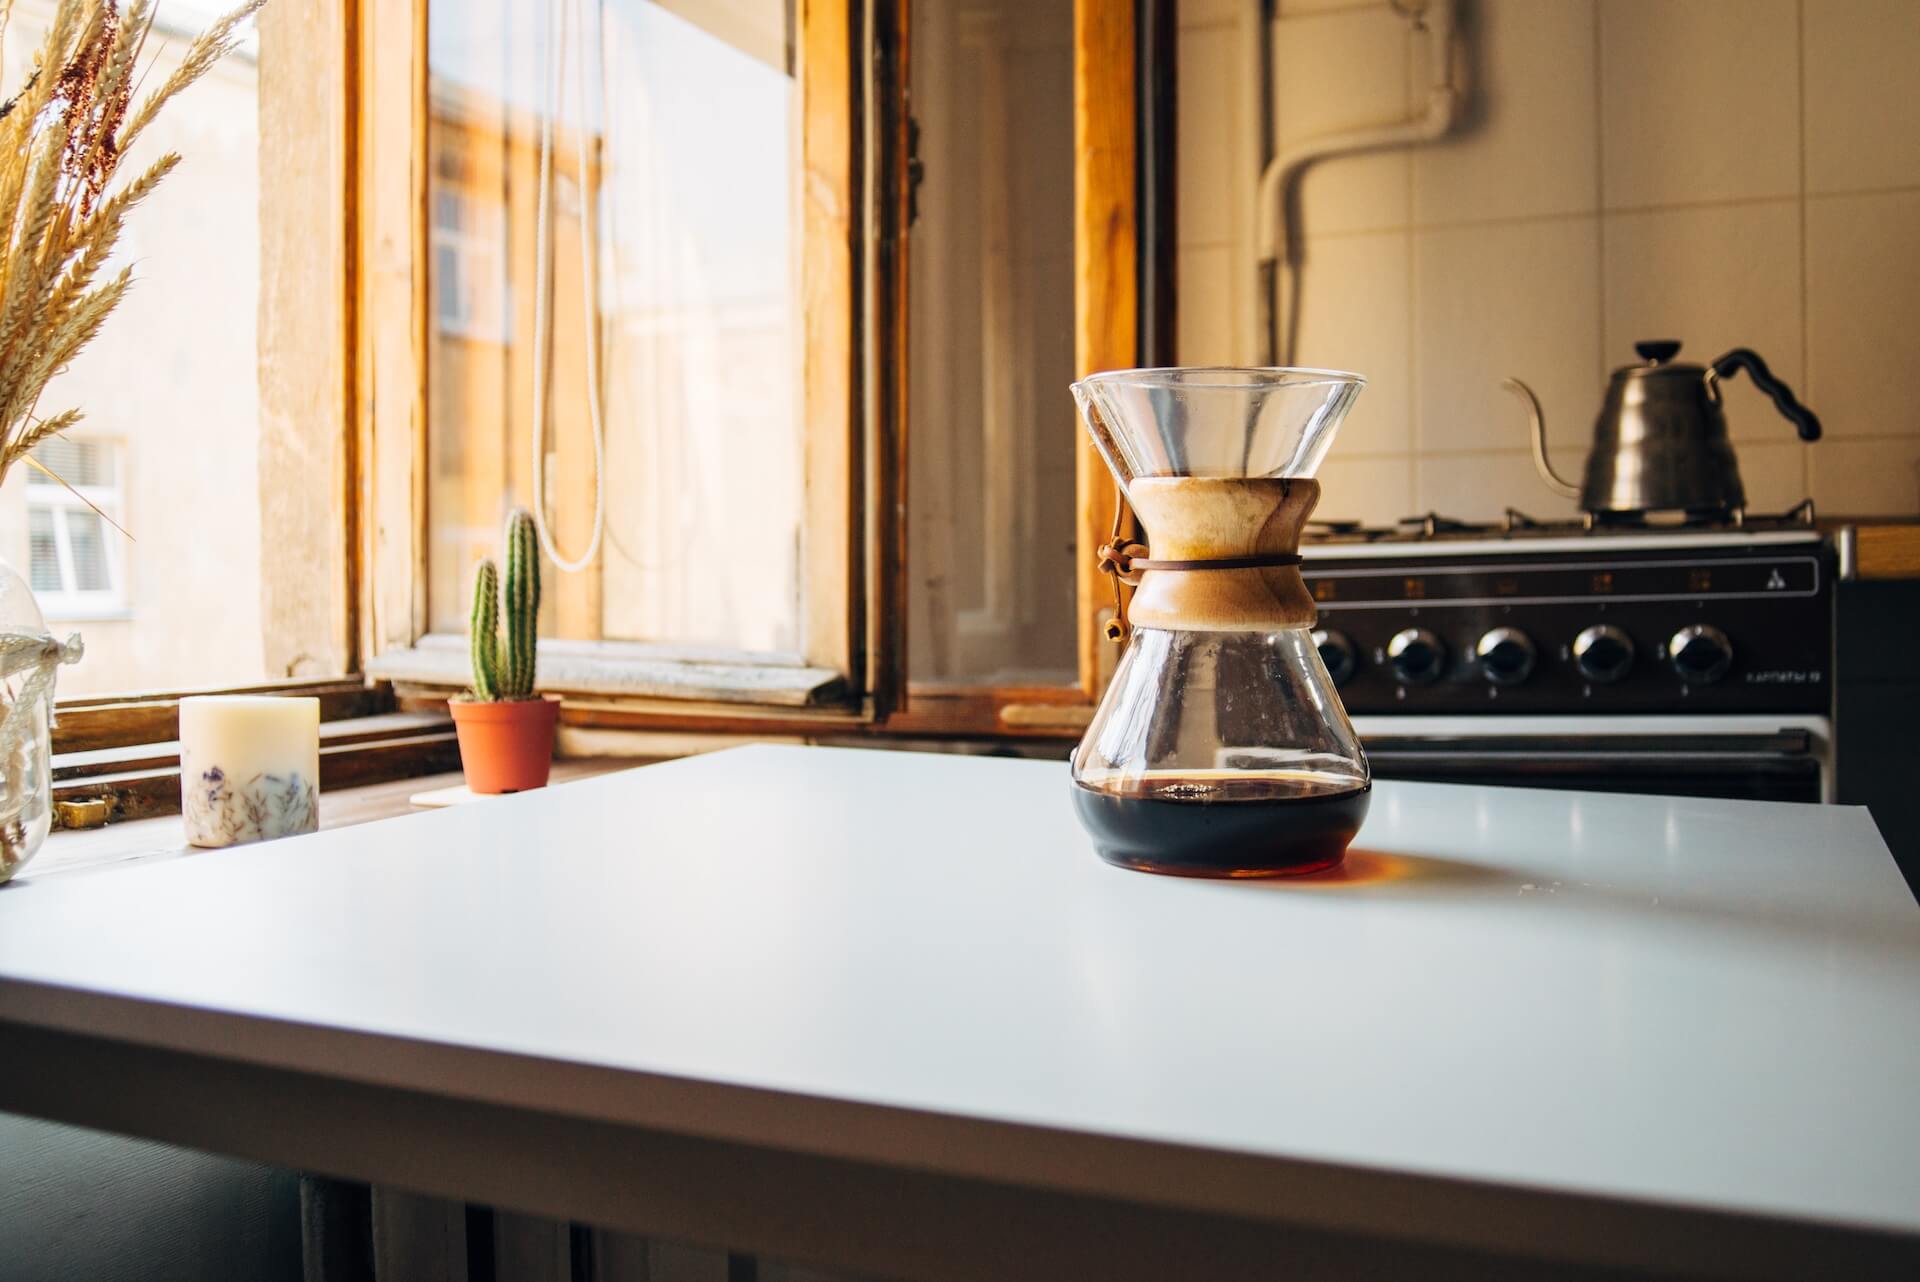 A beginners’ guide to brewing with Chemex testest